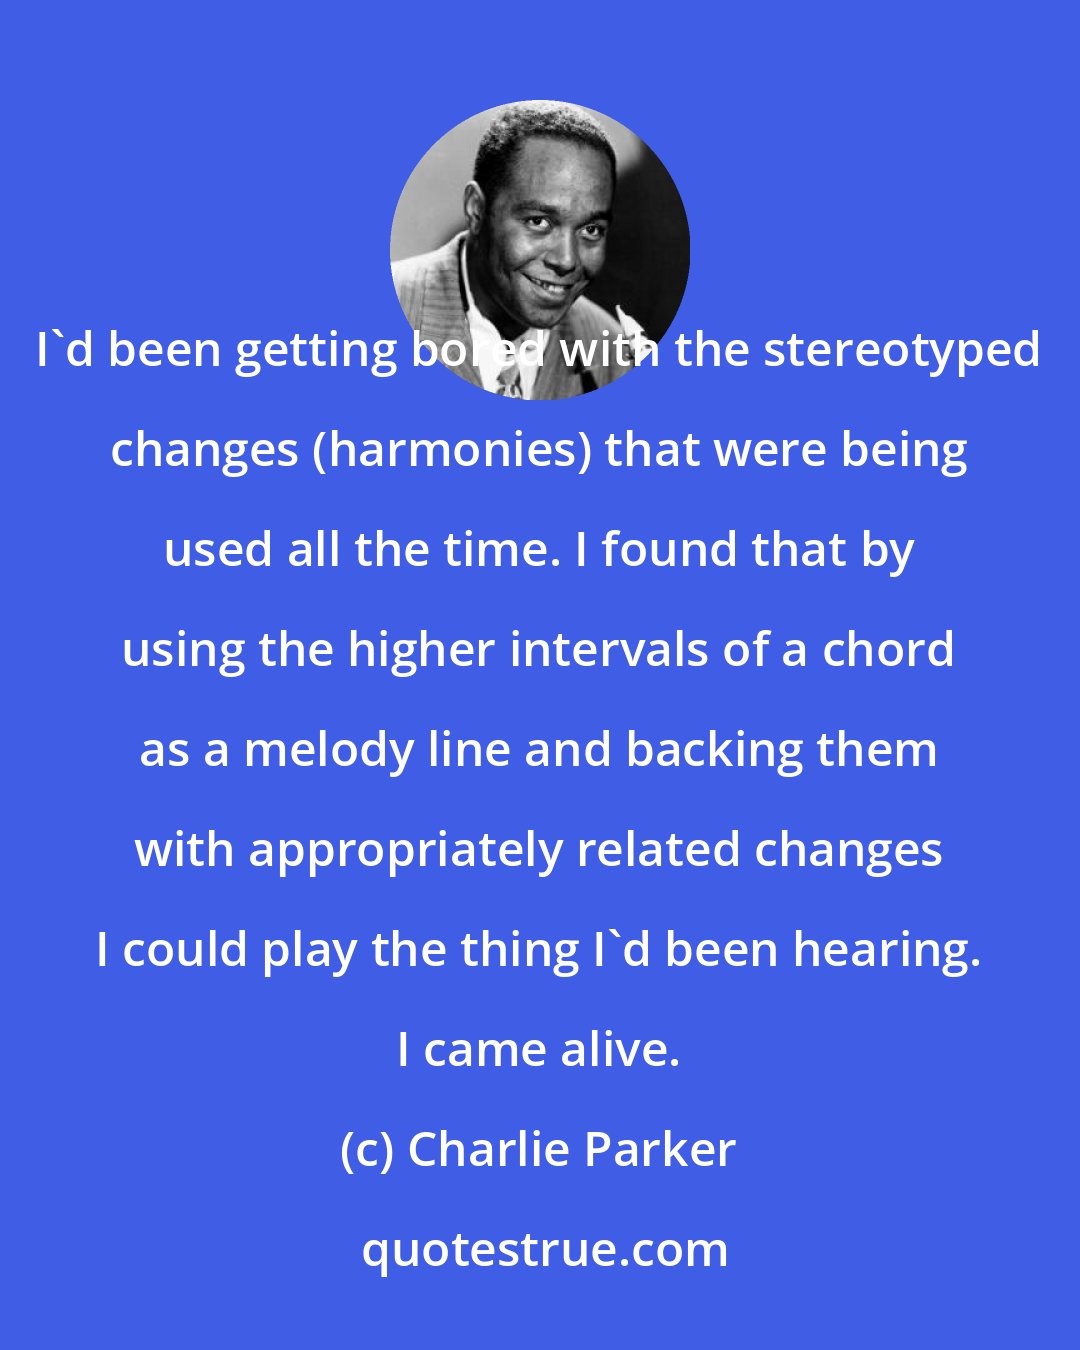 Charlie Parker: I'd been getting bored with the stereotyped changes (harmonies) that were being used all the time. I found that by using the higher intervals of a chord as a melody line and backing them with appropriately related changes I could play the thing I'd been hearing. I came alive.